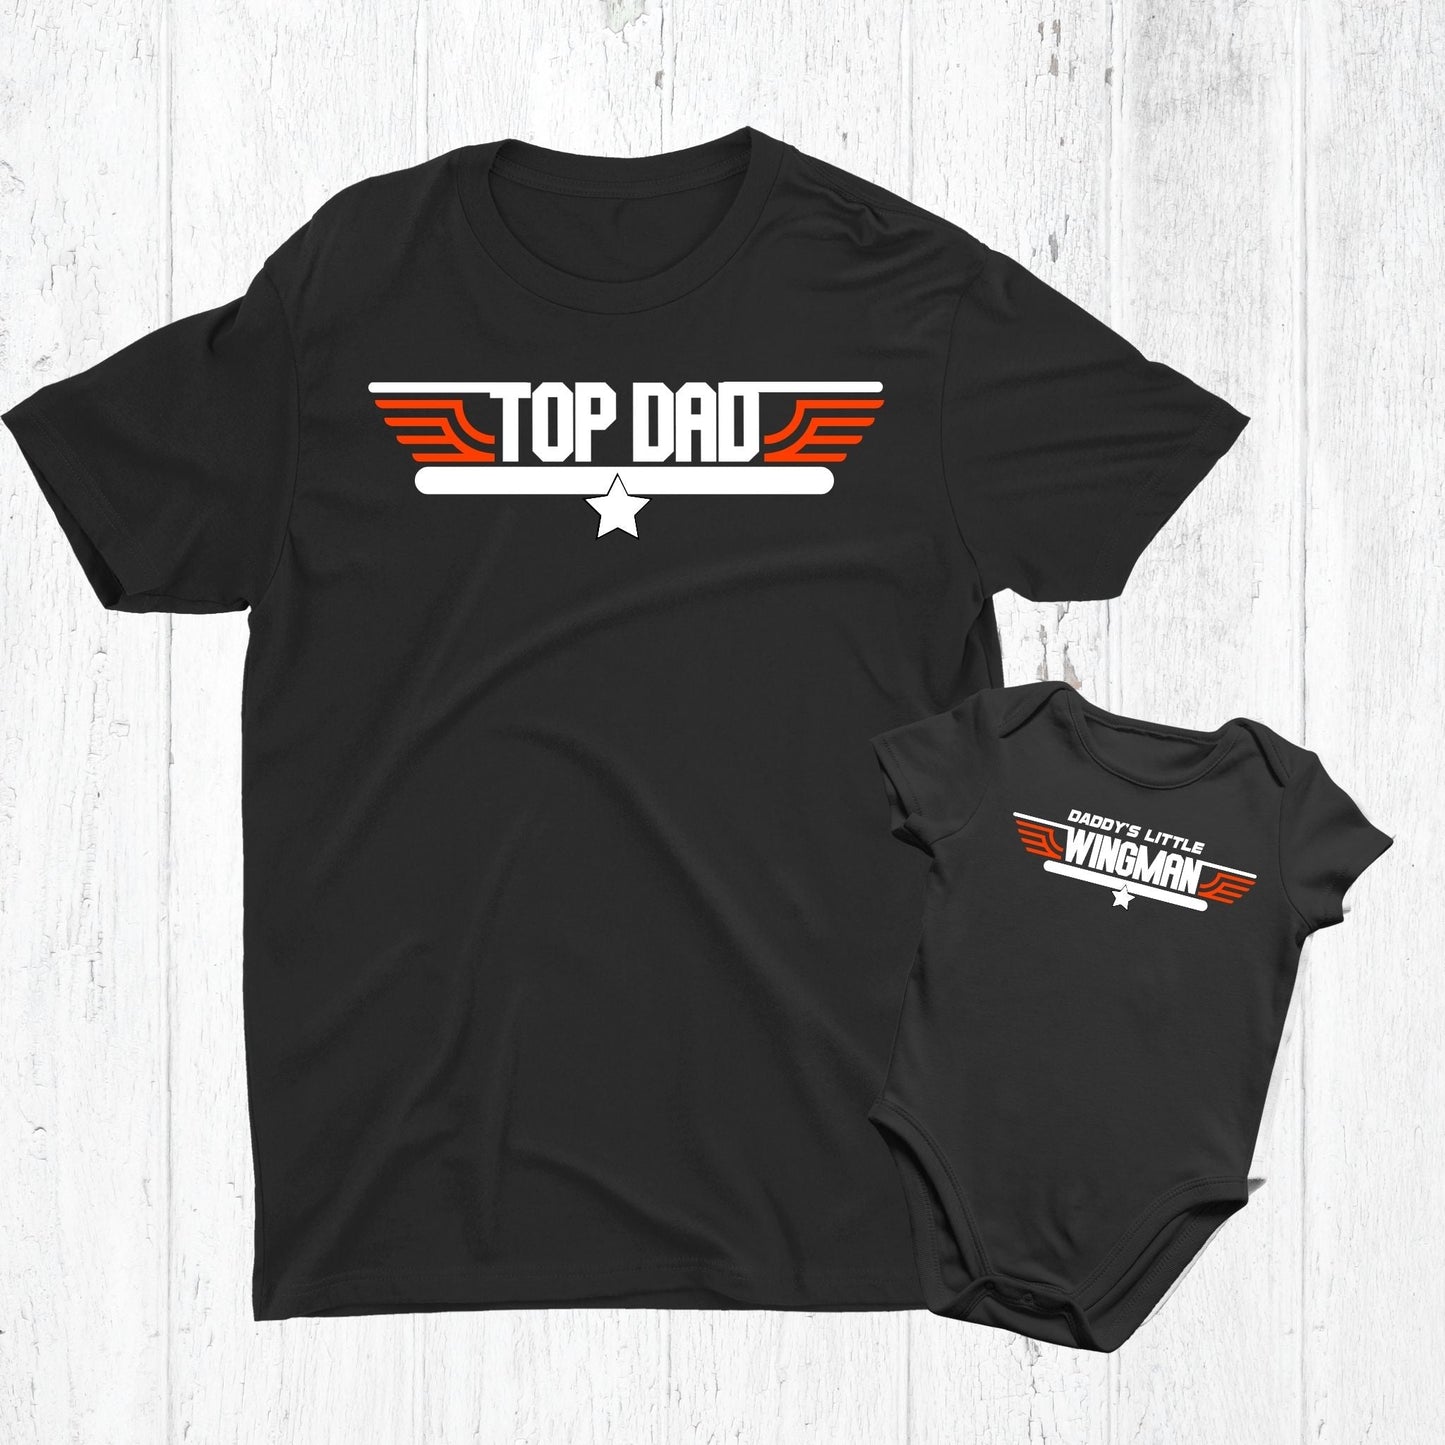 Top Dad Matching Set for Dad and Baby - Three2Tango Tee's